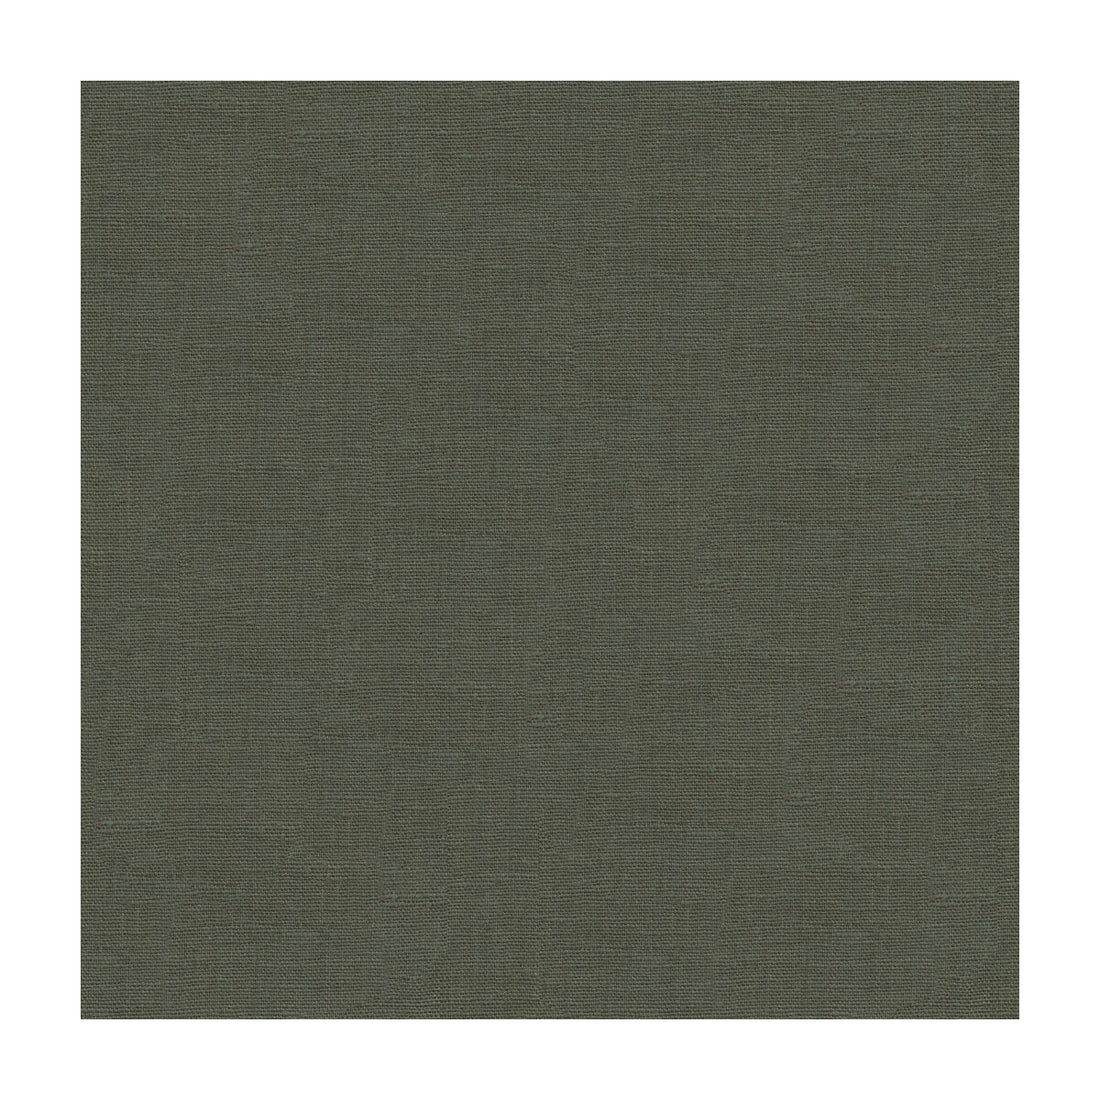 Dublin fabric in slate color - pattern 32344.52.0 - by Kravet Basics in the Perfect Plains collection